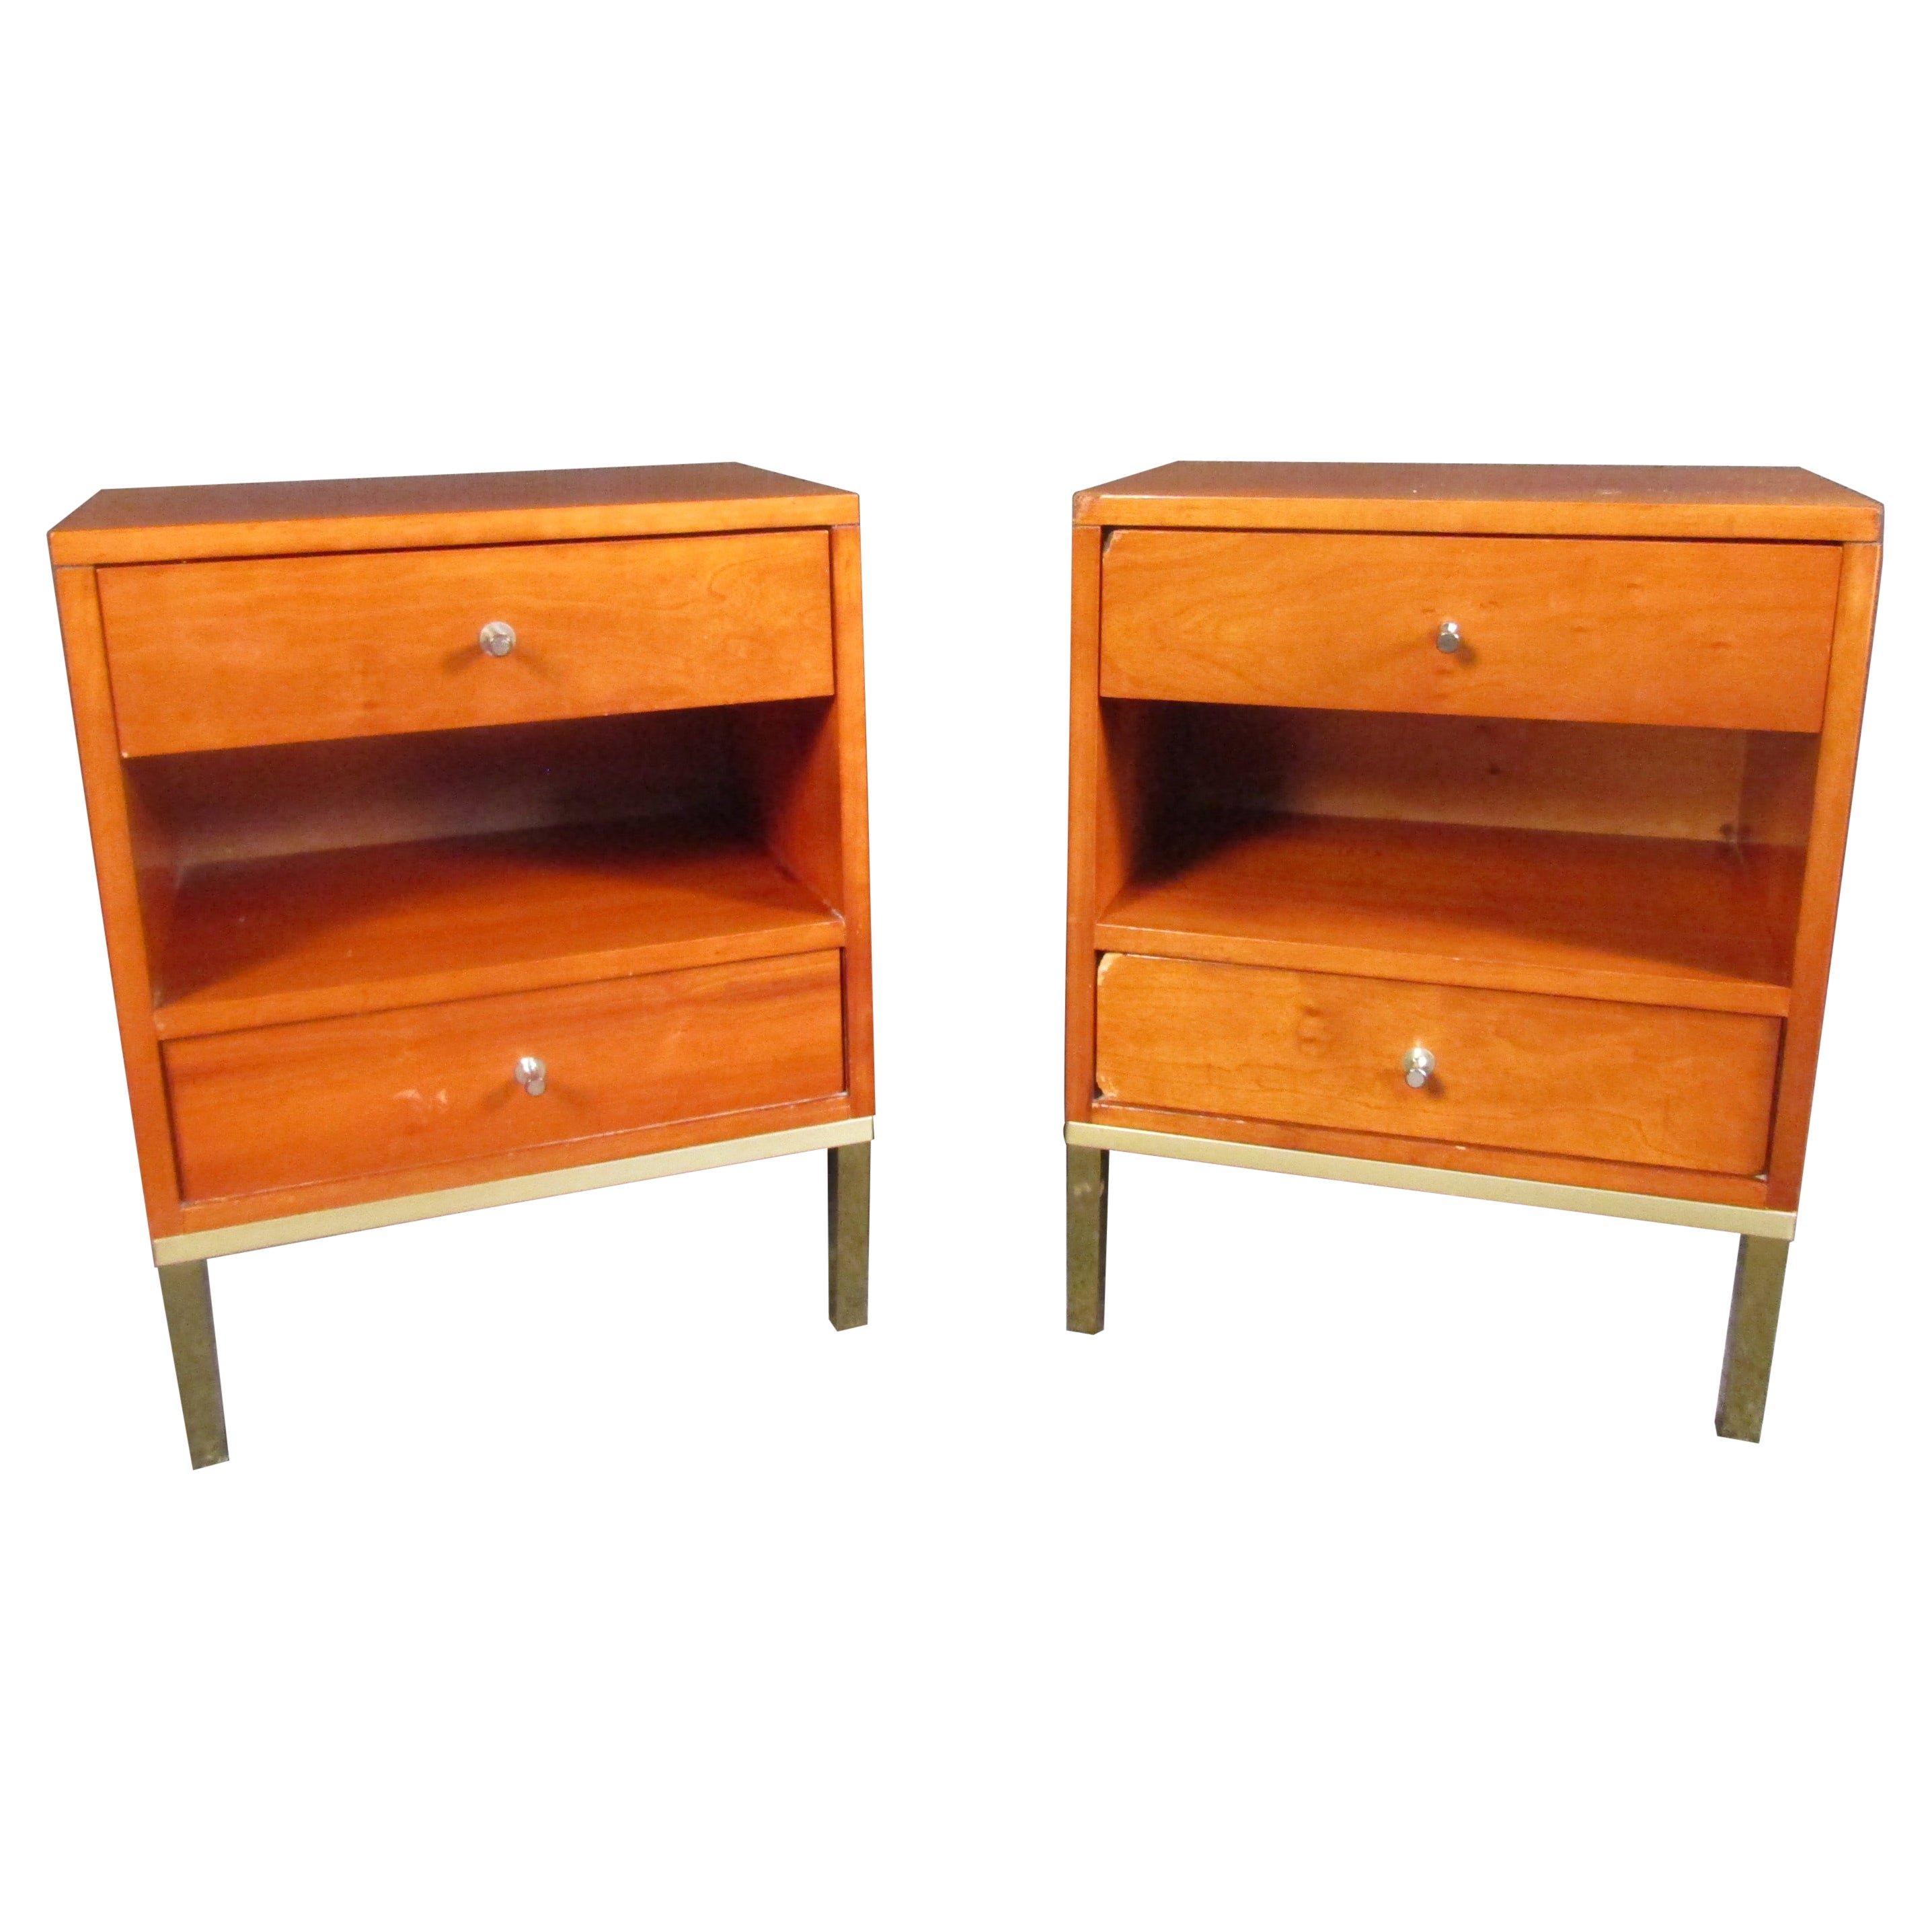 Pair of Vintage Walnut Night Stands in the Style of Paul McCobb